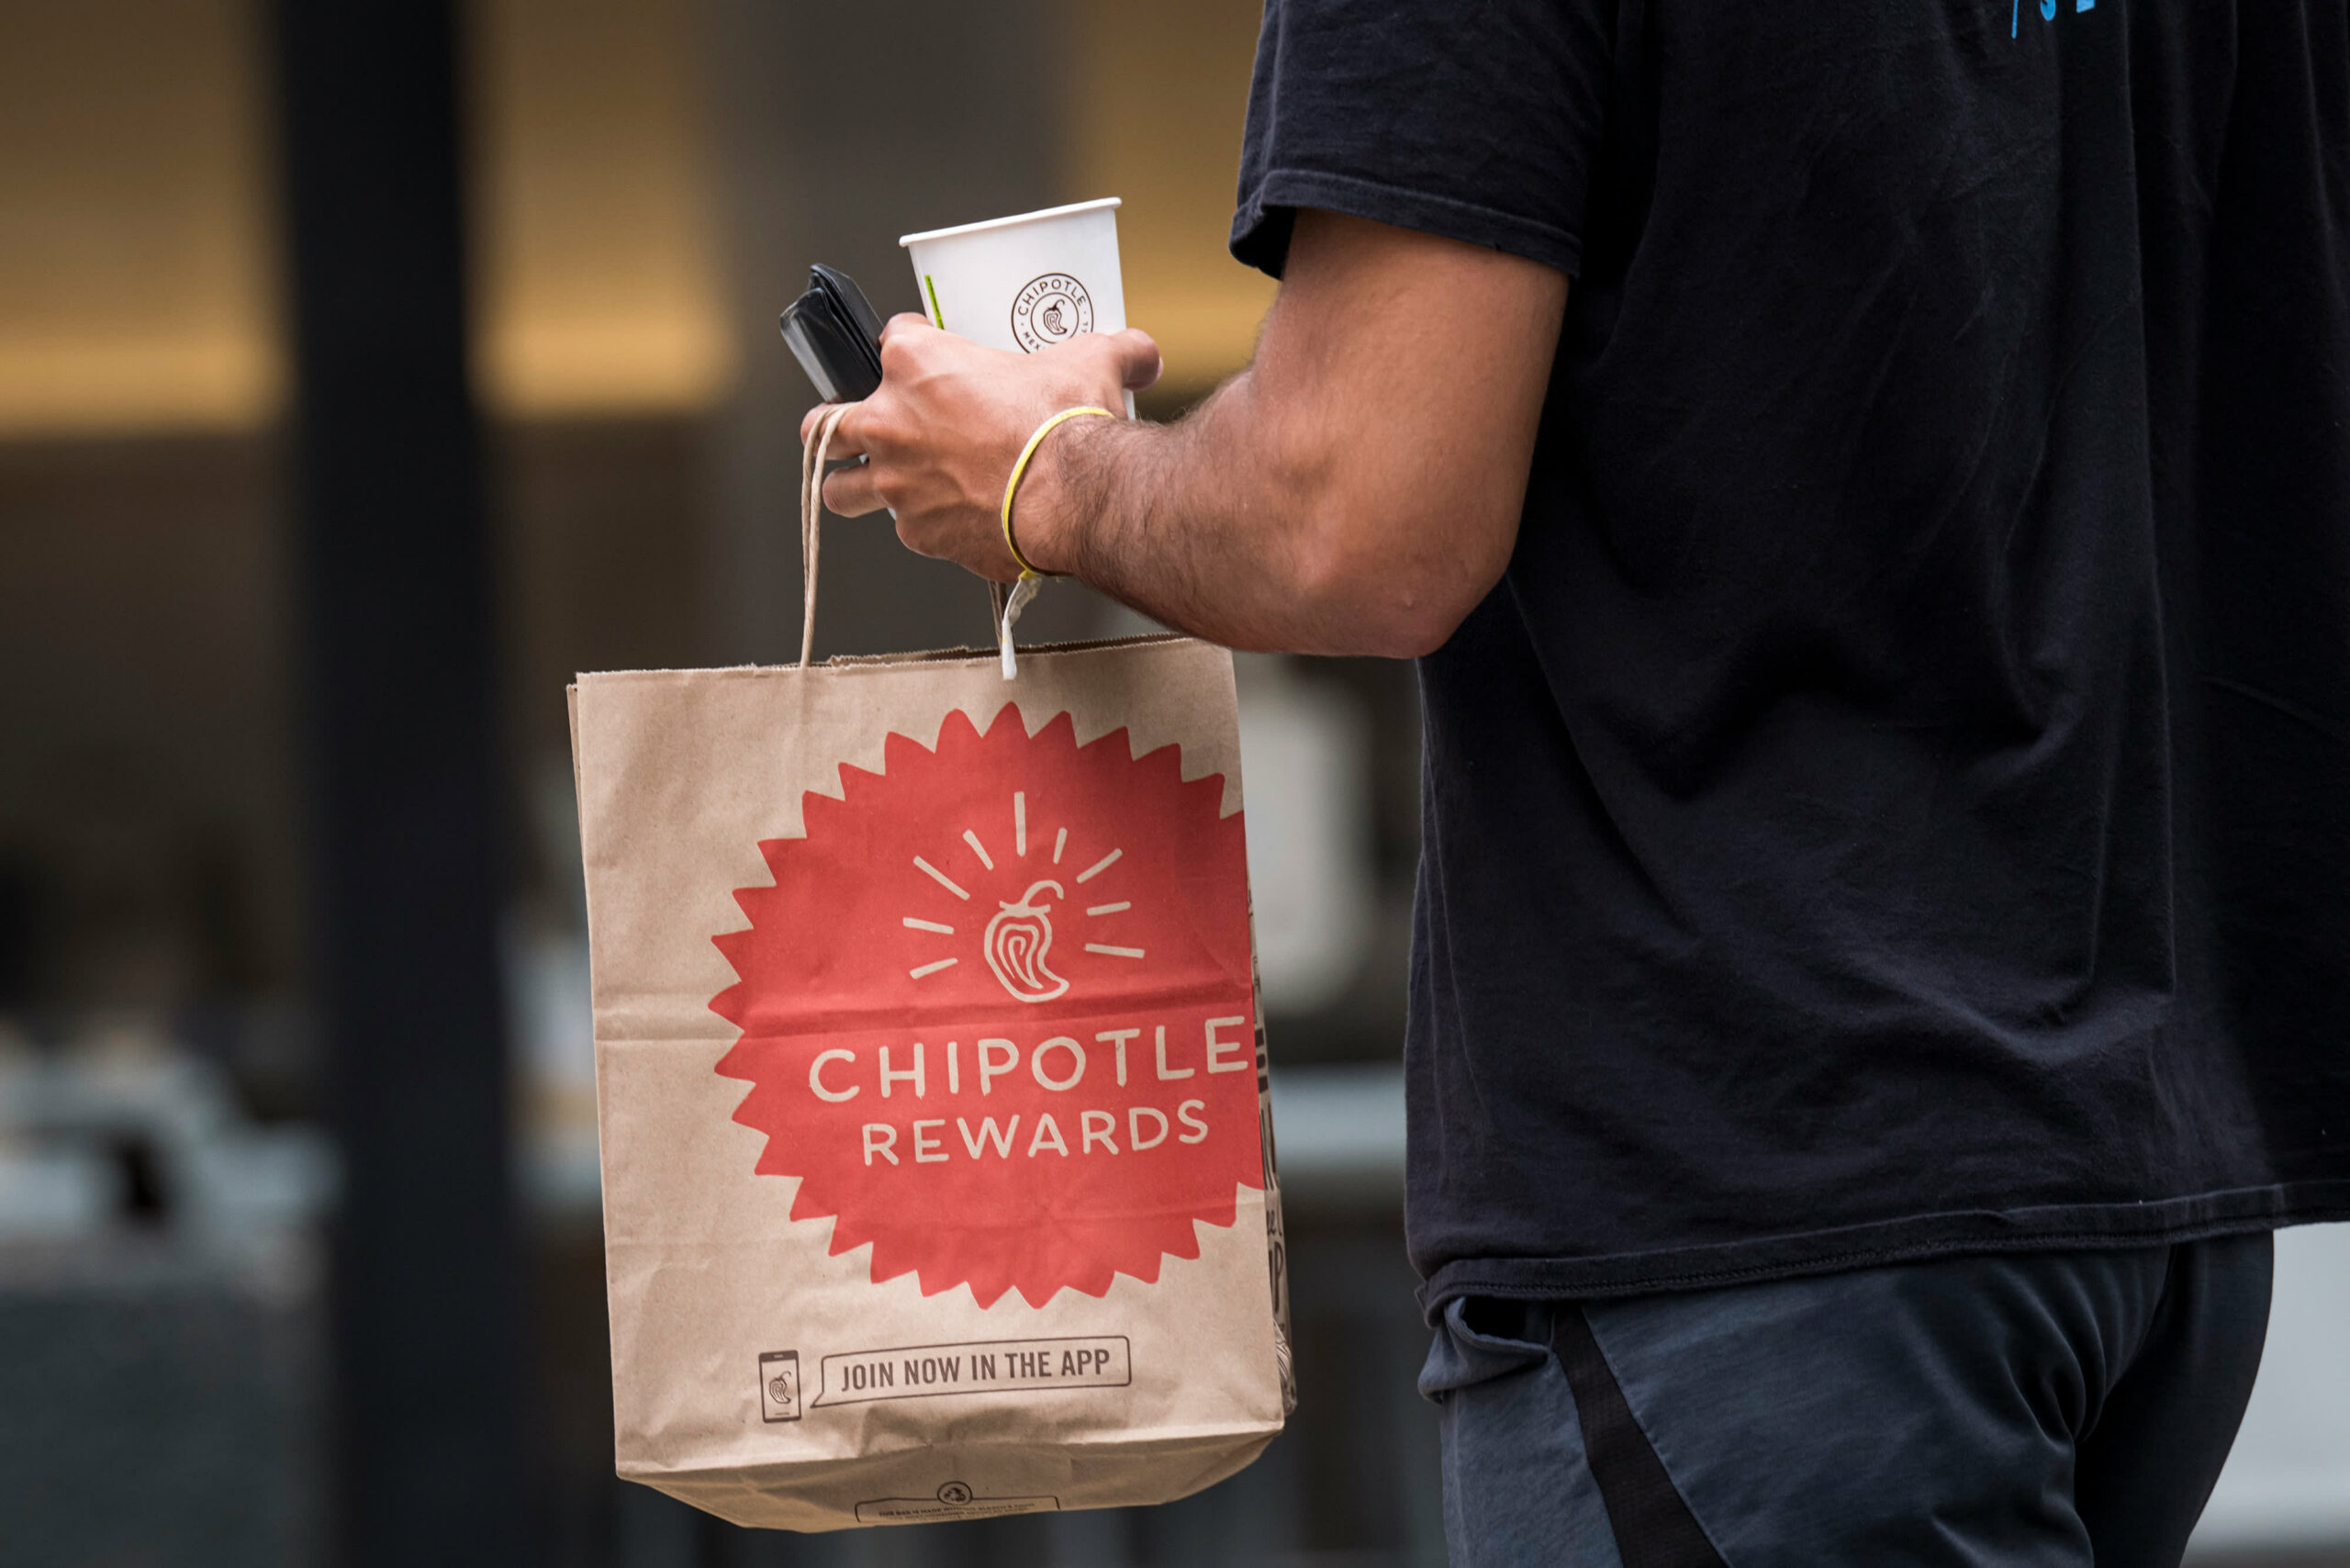 Jim Cramer reacts to Chipotle huge earnings beat: ‘Chipotle delivered’